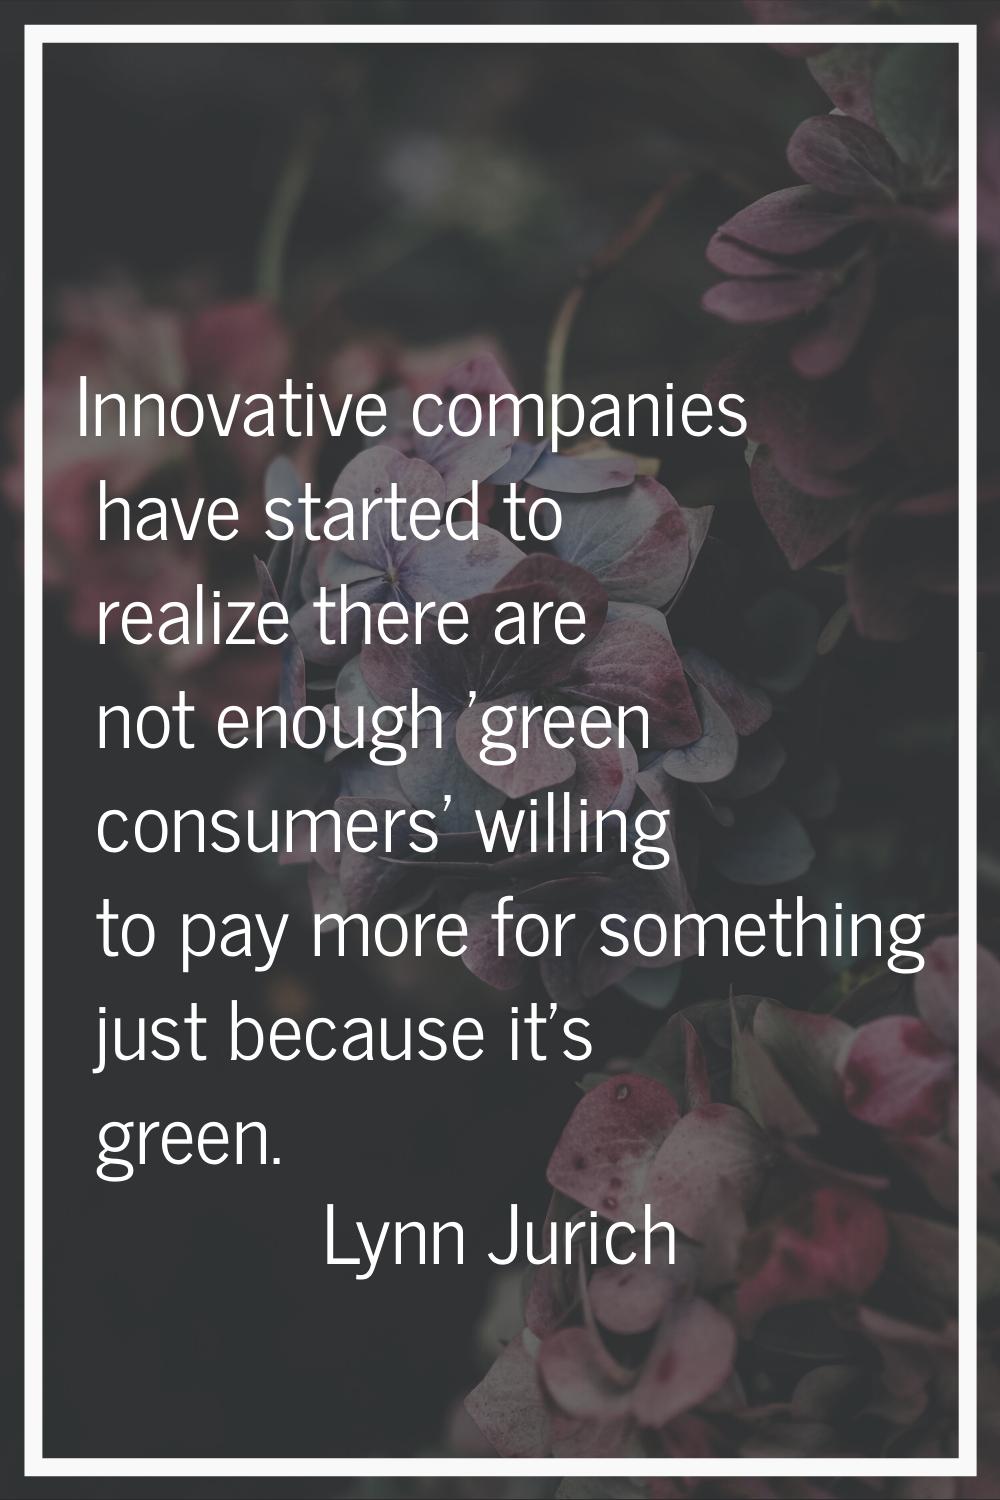 Innovative companies have started to realize there are not enough 'green consumers' willing to pay 